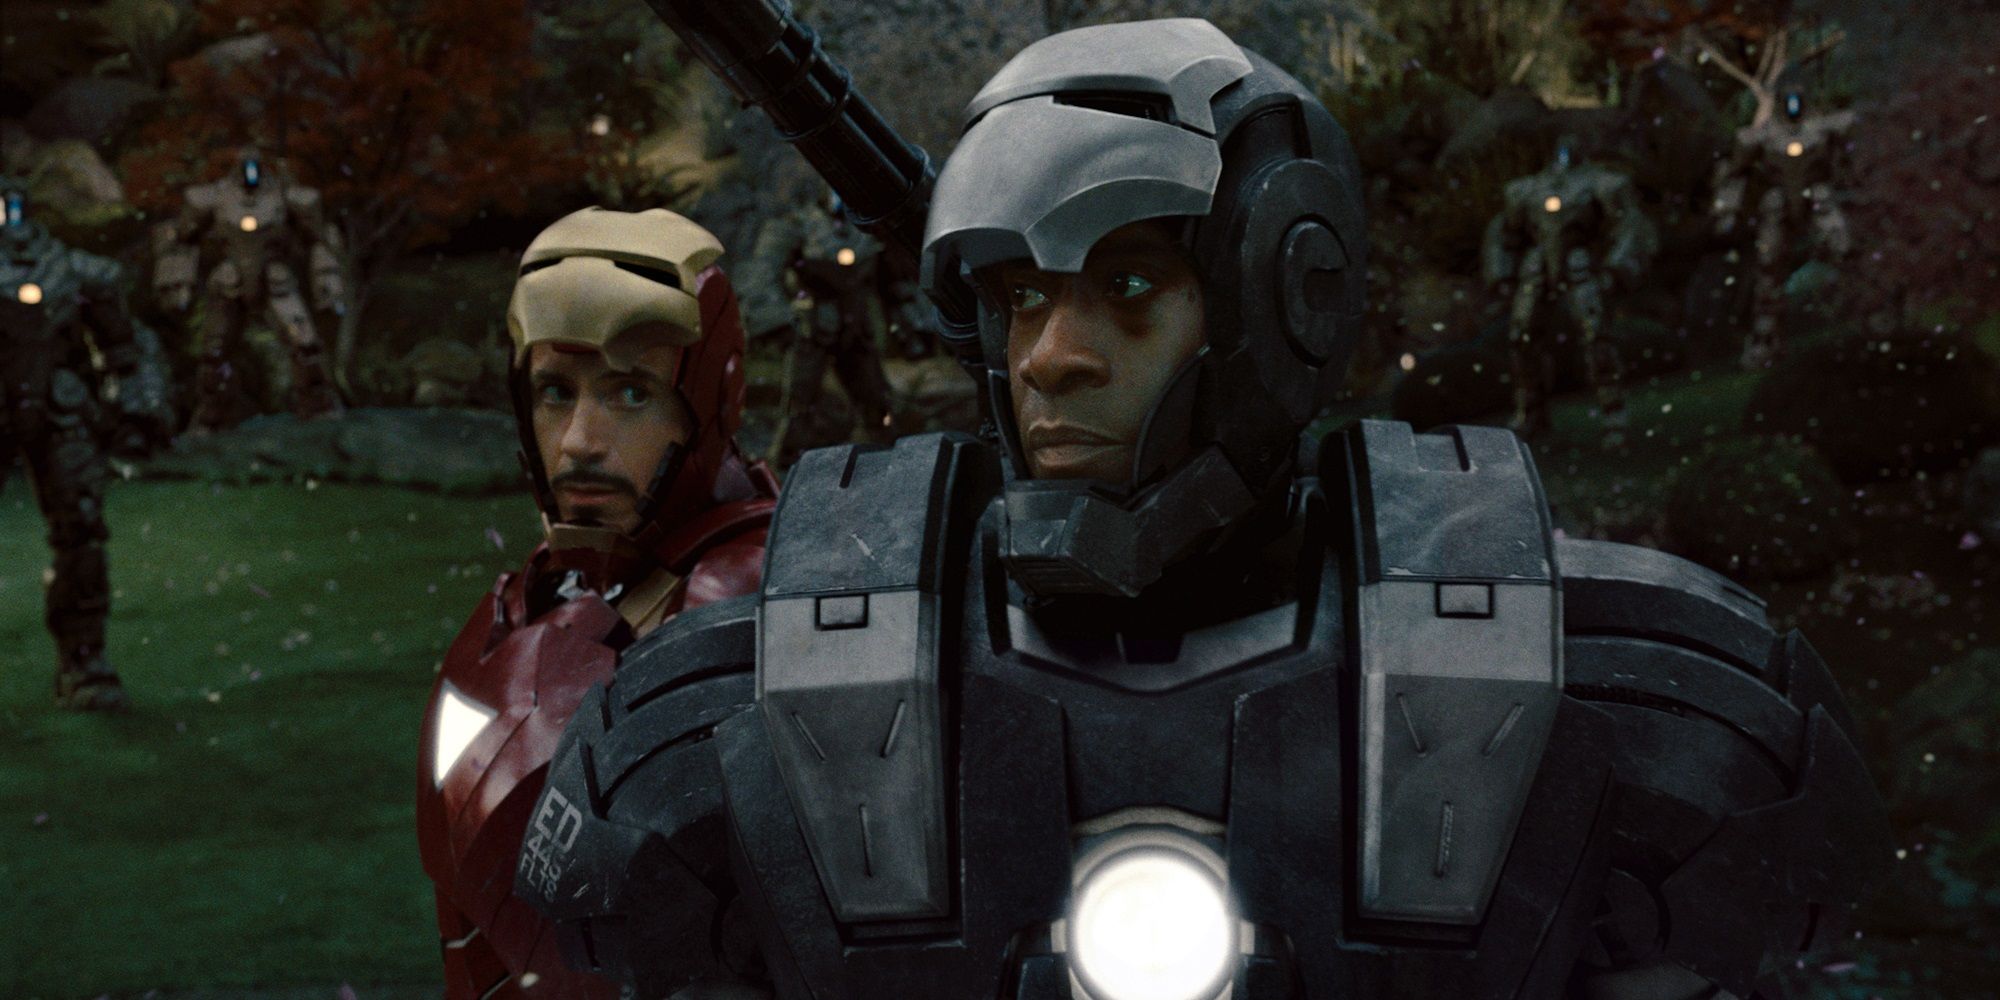 Iron Man and War Machine standing together in Iron Man 2